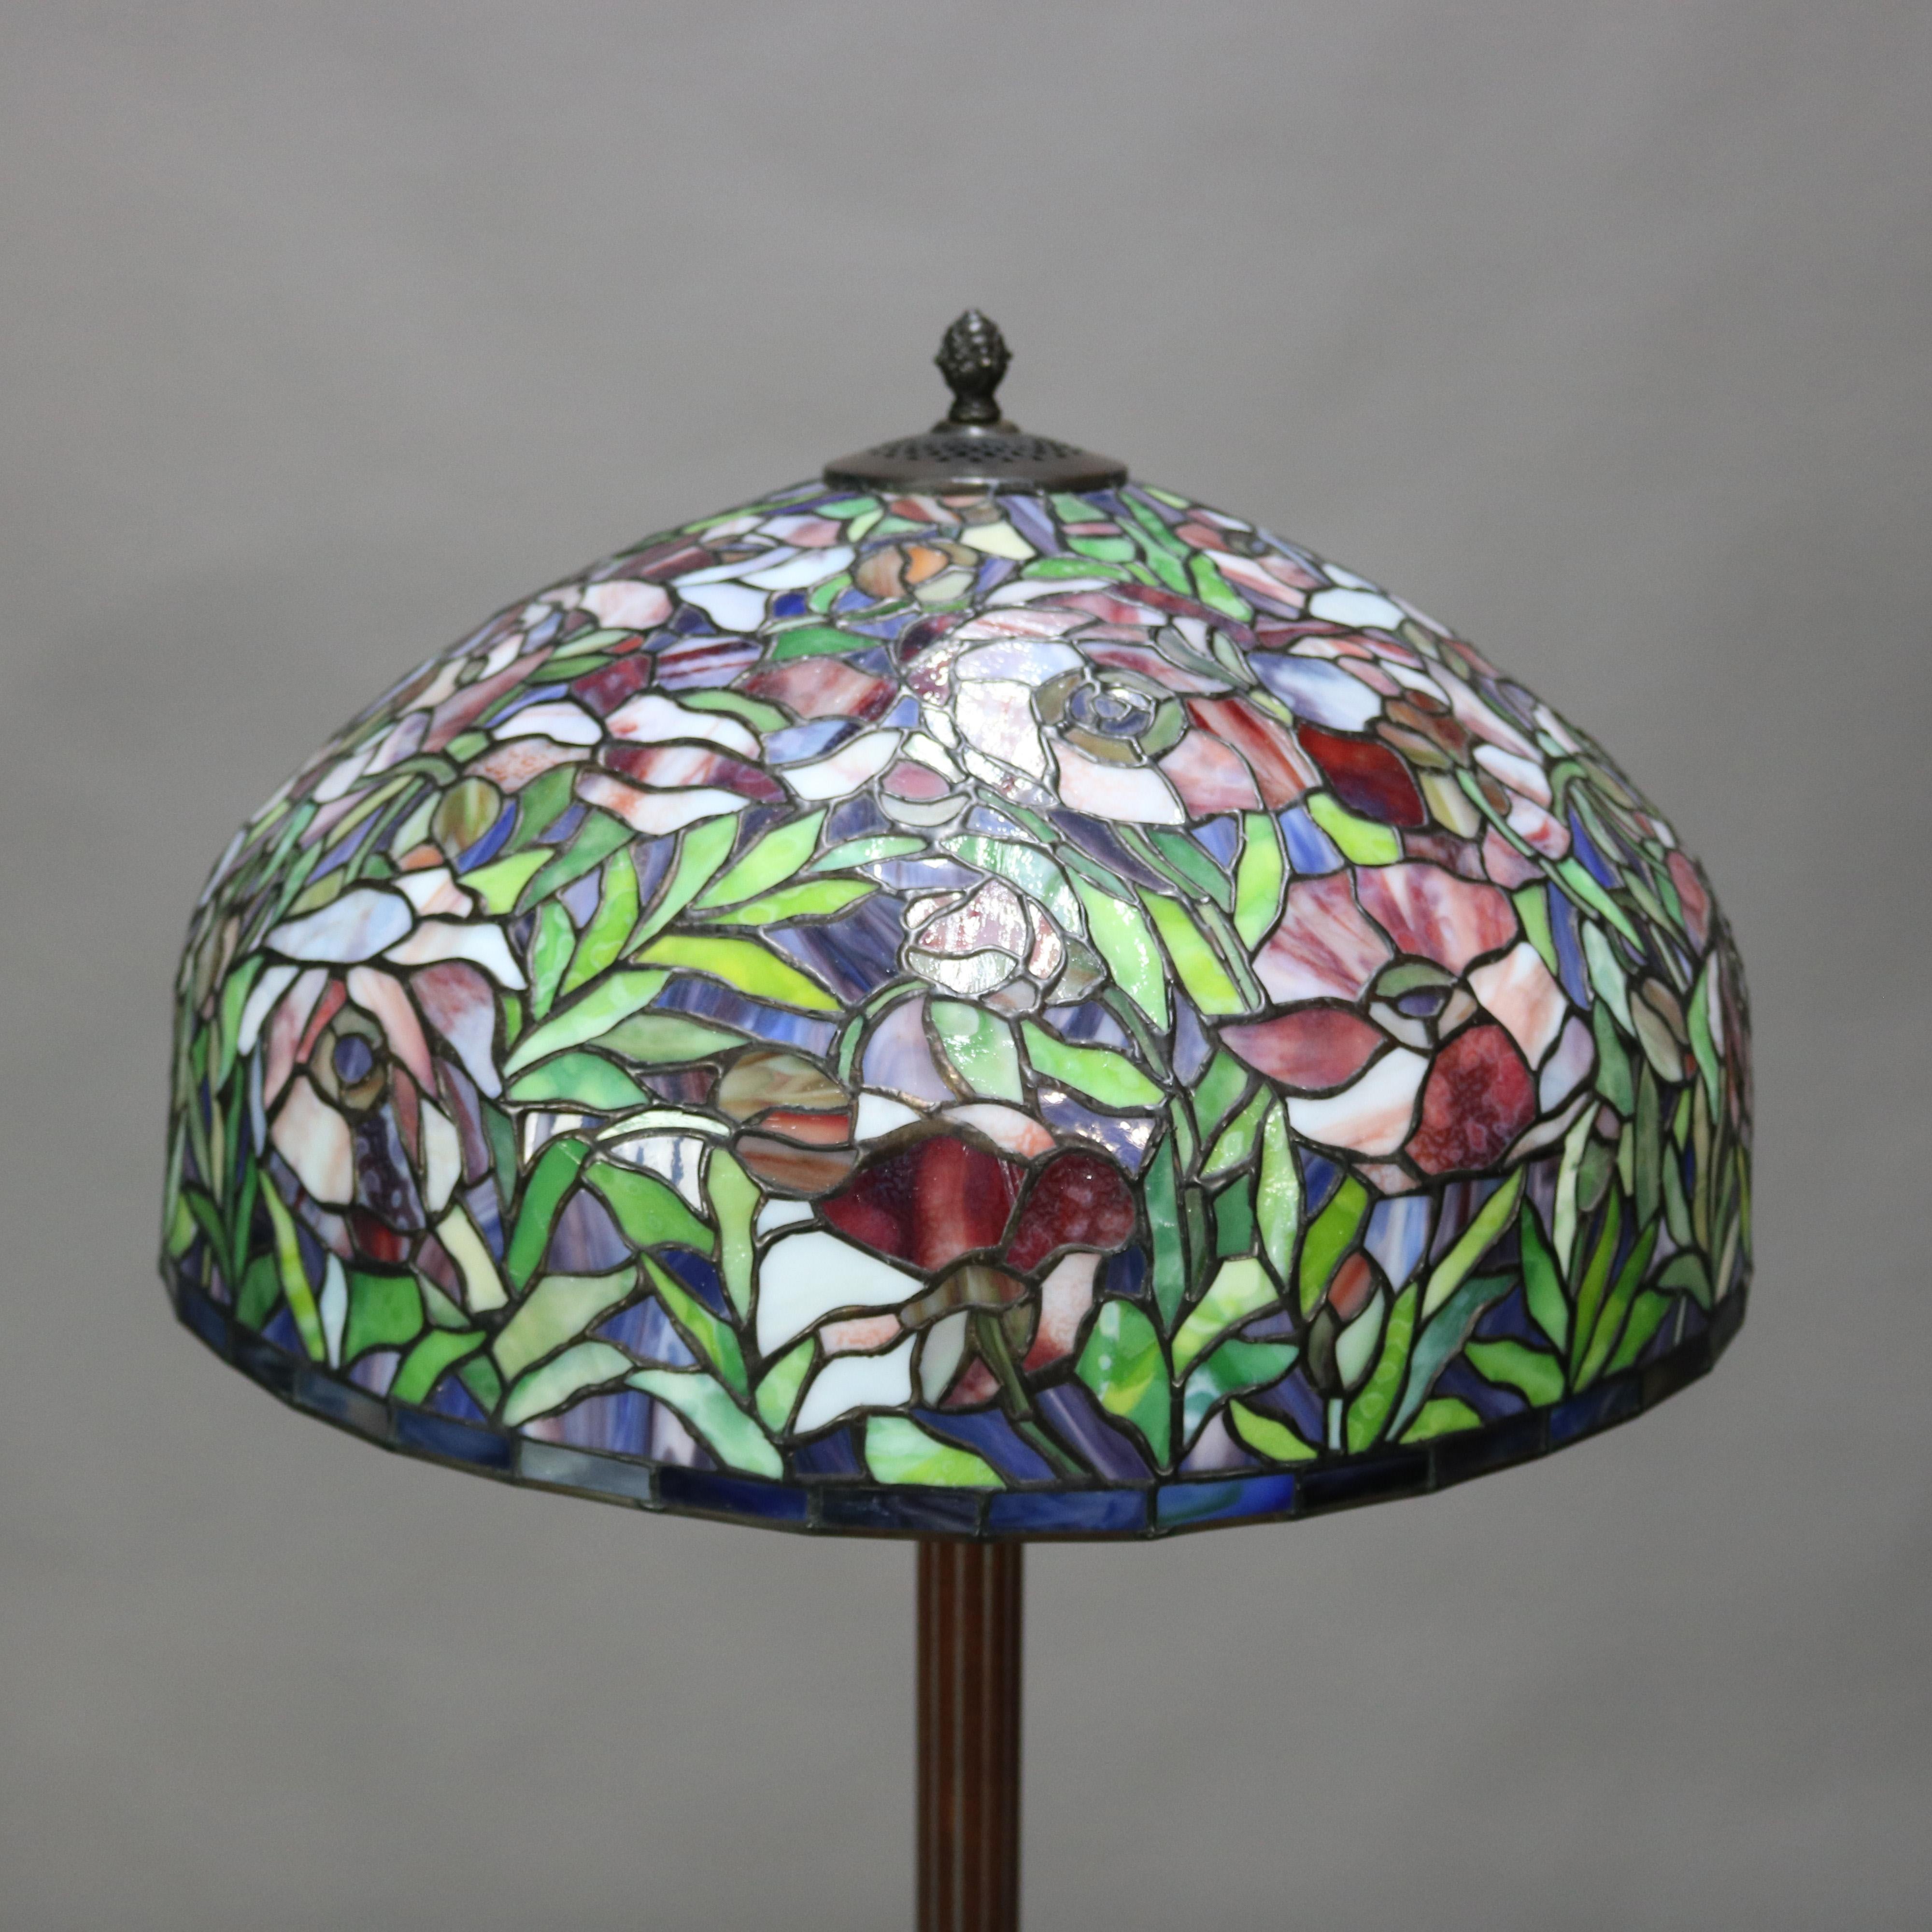 A vintage Arts & Crafts Tiffany Studios style mosaic floor lamp offers dome form leaded stained glass shade with floral design surmounting triple socket cast metal base raised on tripod stylized paw feet, 20th century

***DELIVERY NOTICE – Due to